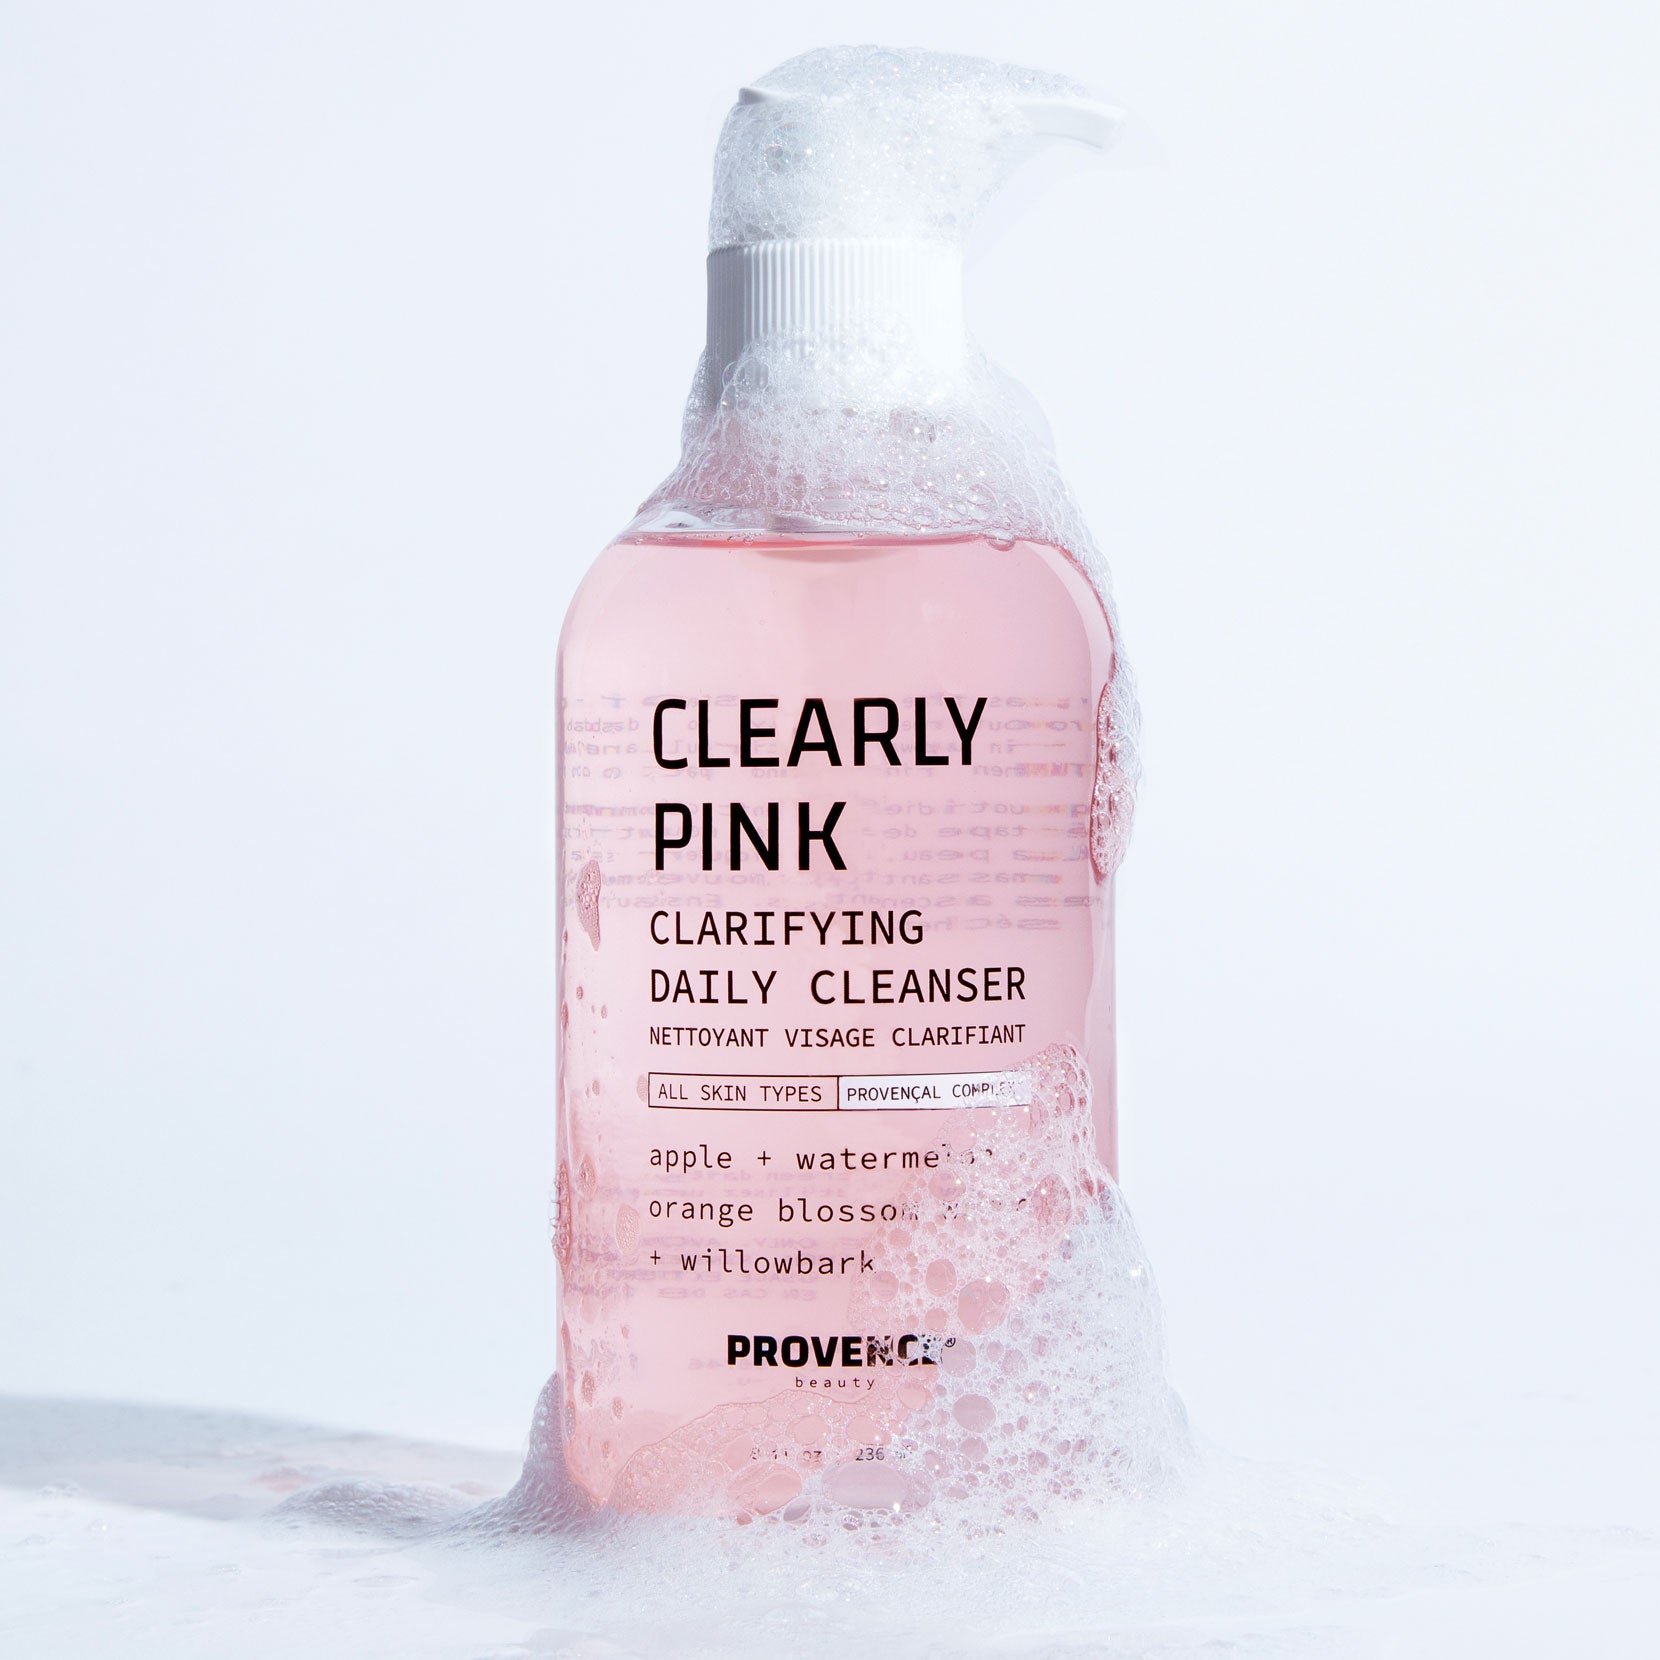 A photo of the Clearly Pink Clarifying Cleanser against a white background with foaming bubbles around the bottom and top of the glass bottle. Showcasing the products lively and enriched content.